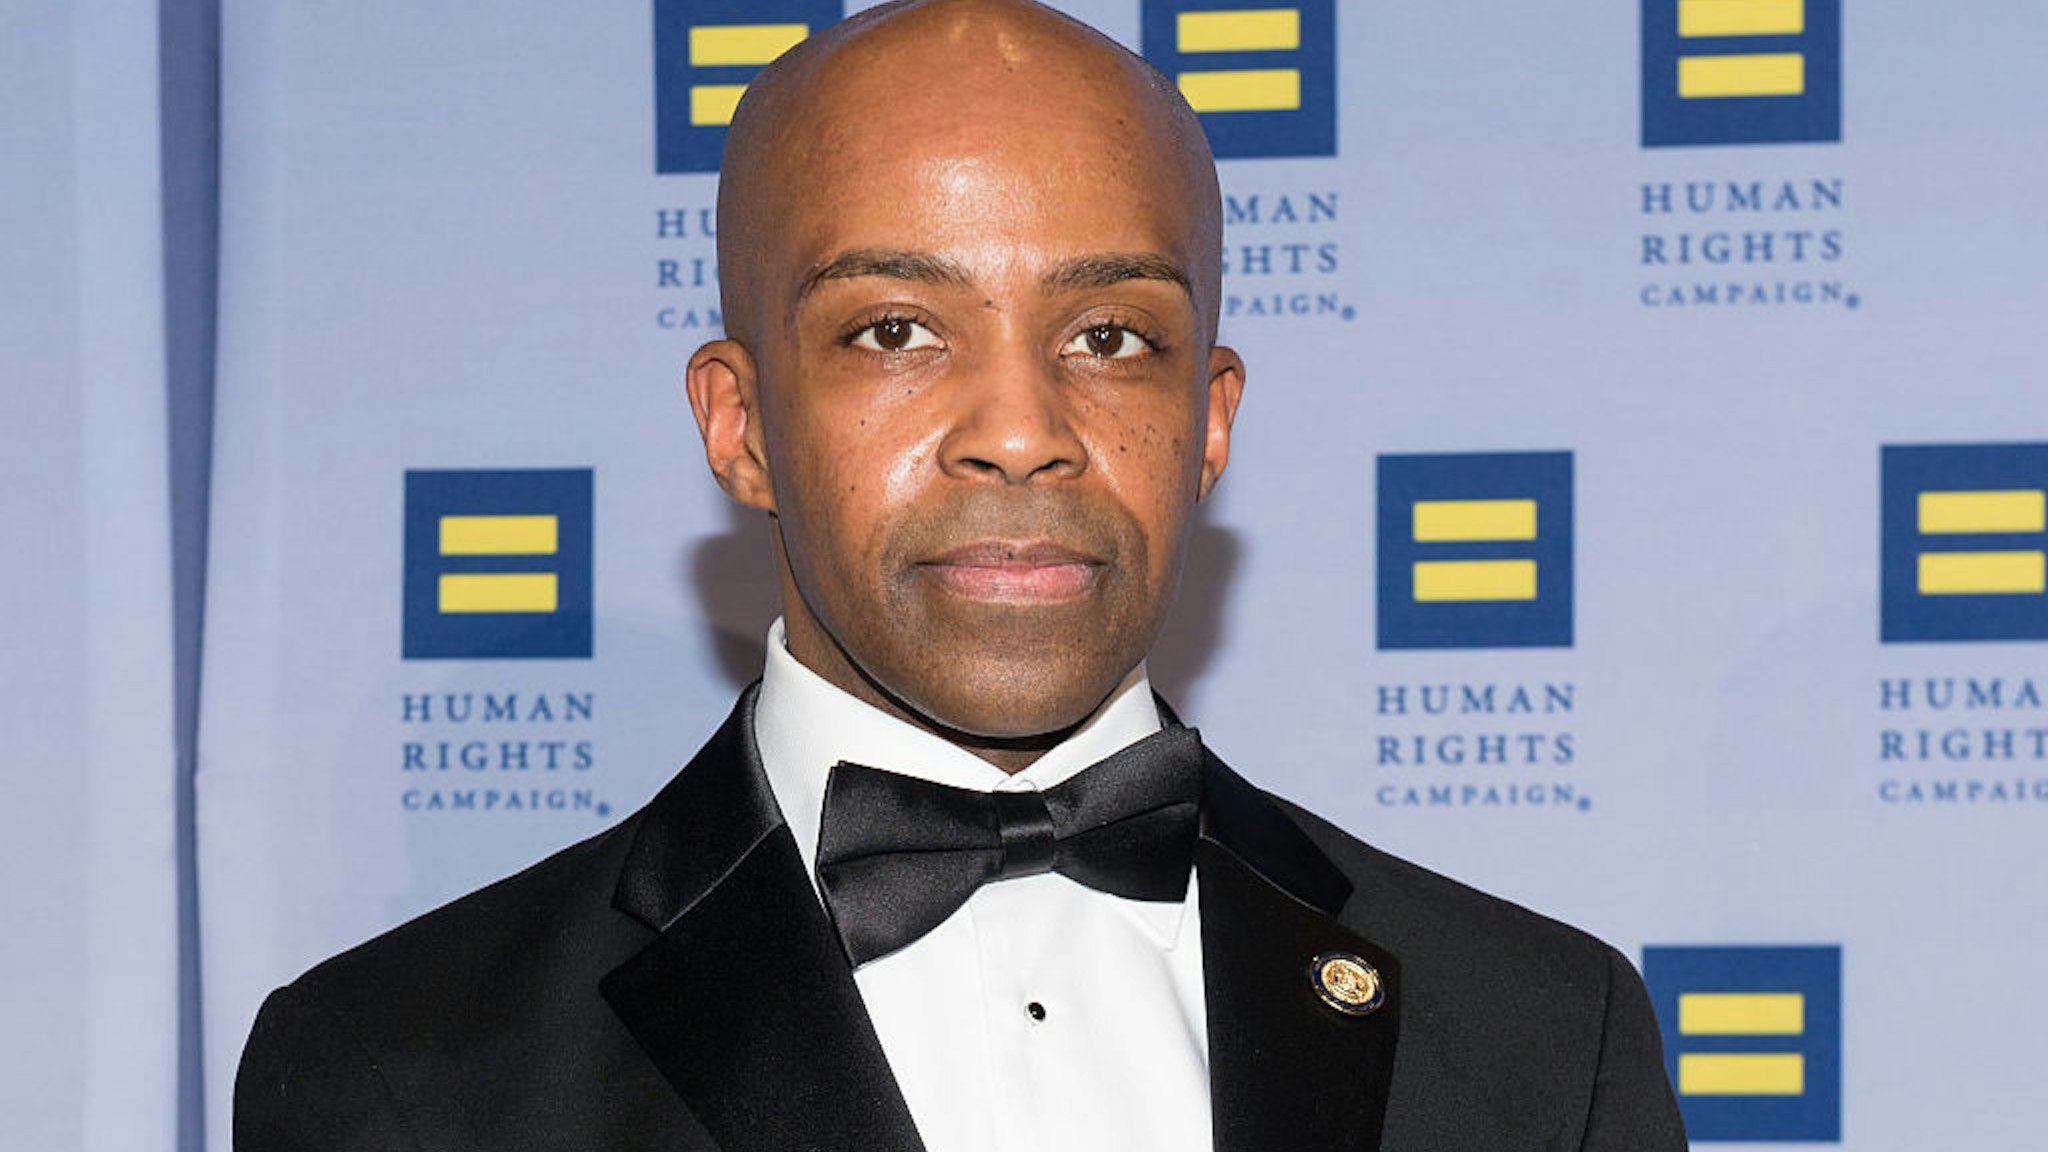 Counsel to the Governor at Office of Governor Andrew M. Cuomo Alphonso David attends the 2016 Human Rights Campaign New York gala dinner at The Waldorf=Astoria on February 6, 2016 in New York City.